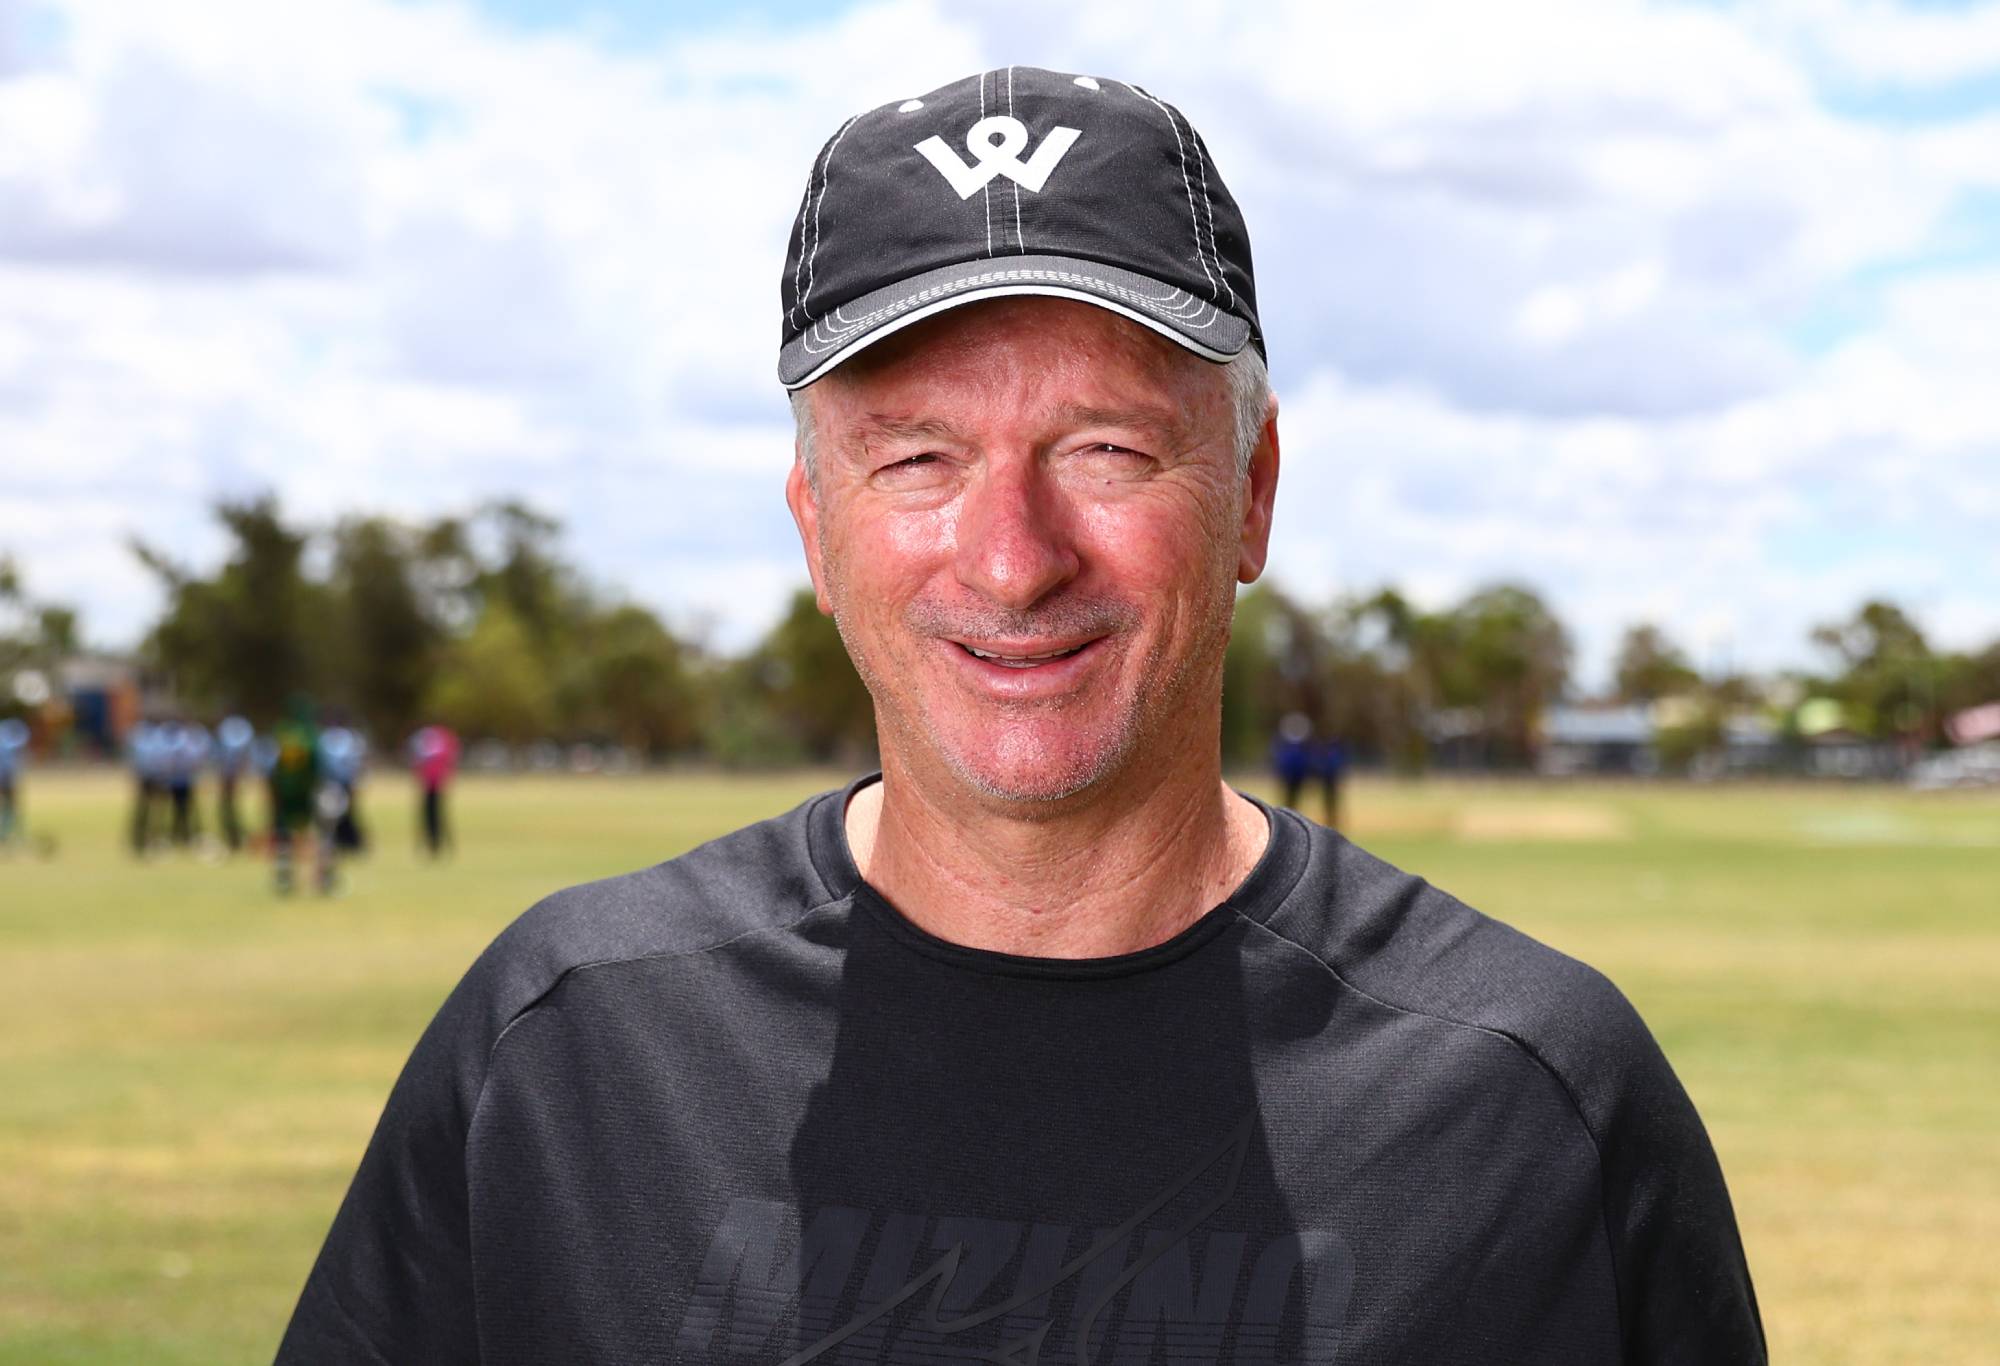 Former Australian cricketer Steve Waugh during the 2023 National Indigenous Championships at Jim McConville Oval on February 24, 2023 in Alice Springs, Australia. (Photo by Chris Hyde - CA/Cricket Australia via Getty Images)